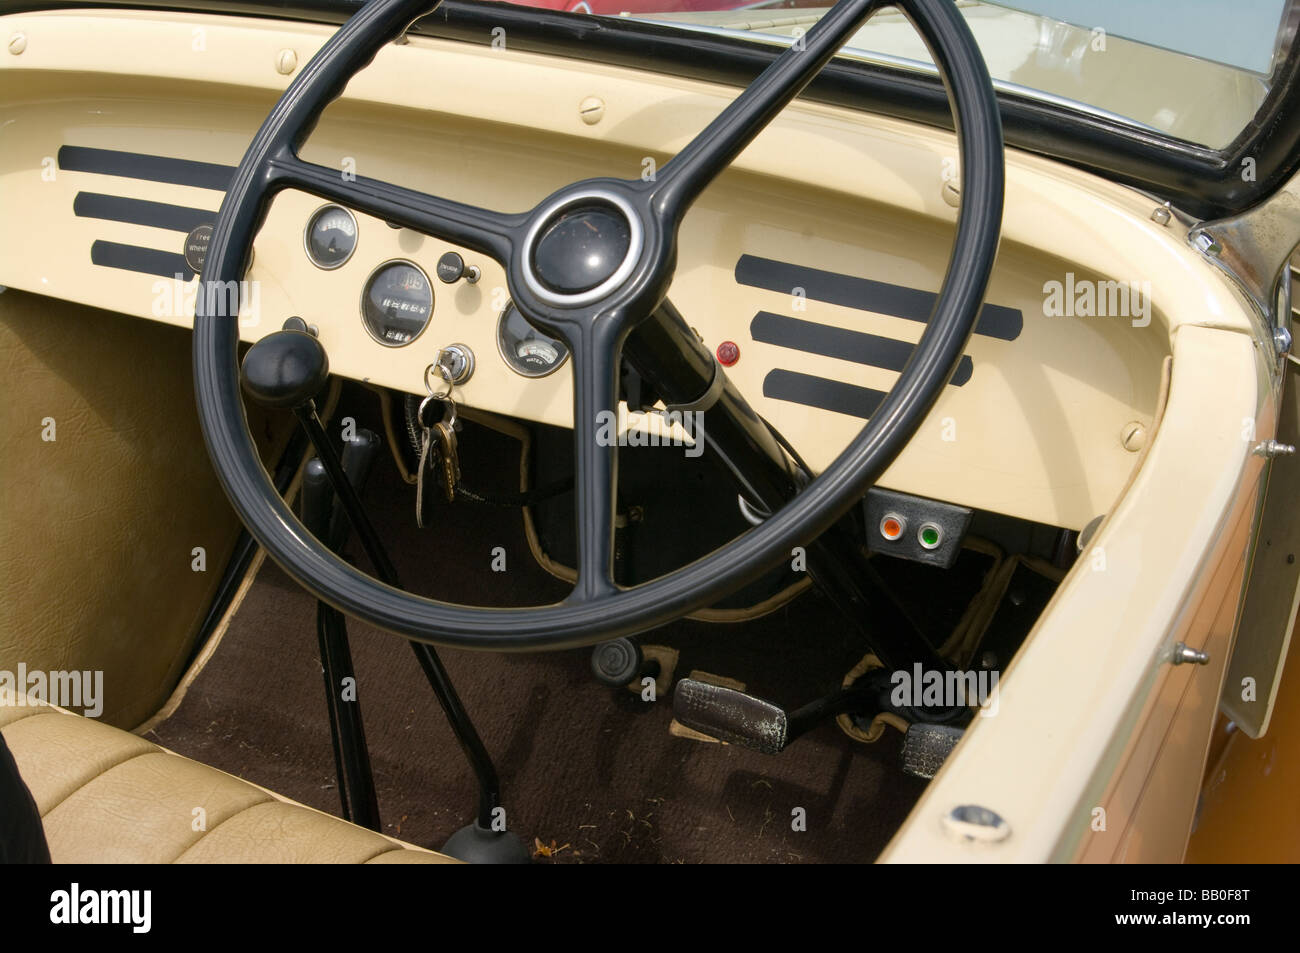 Steering Wheel and Dashboard of a 1932 Chevrolet Confederate interior Stock Photo